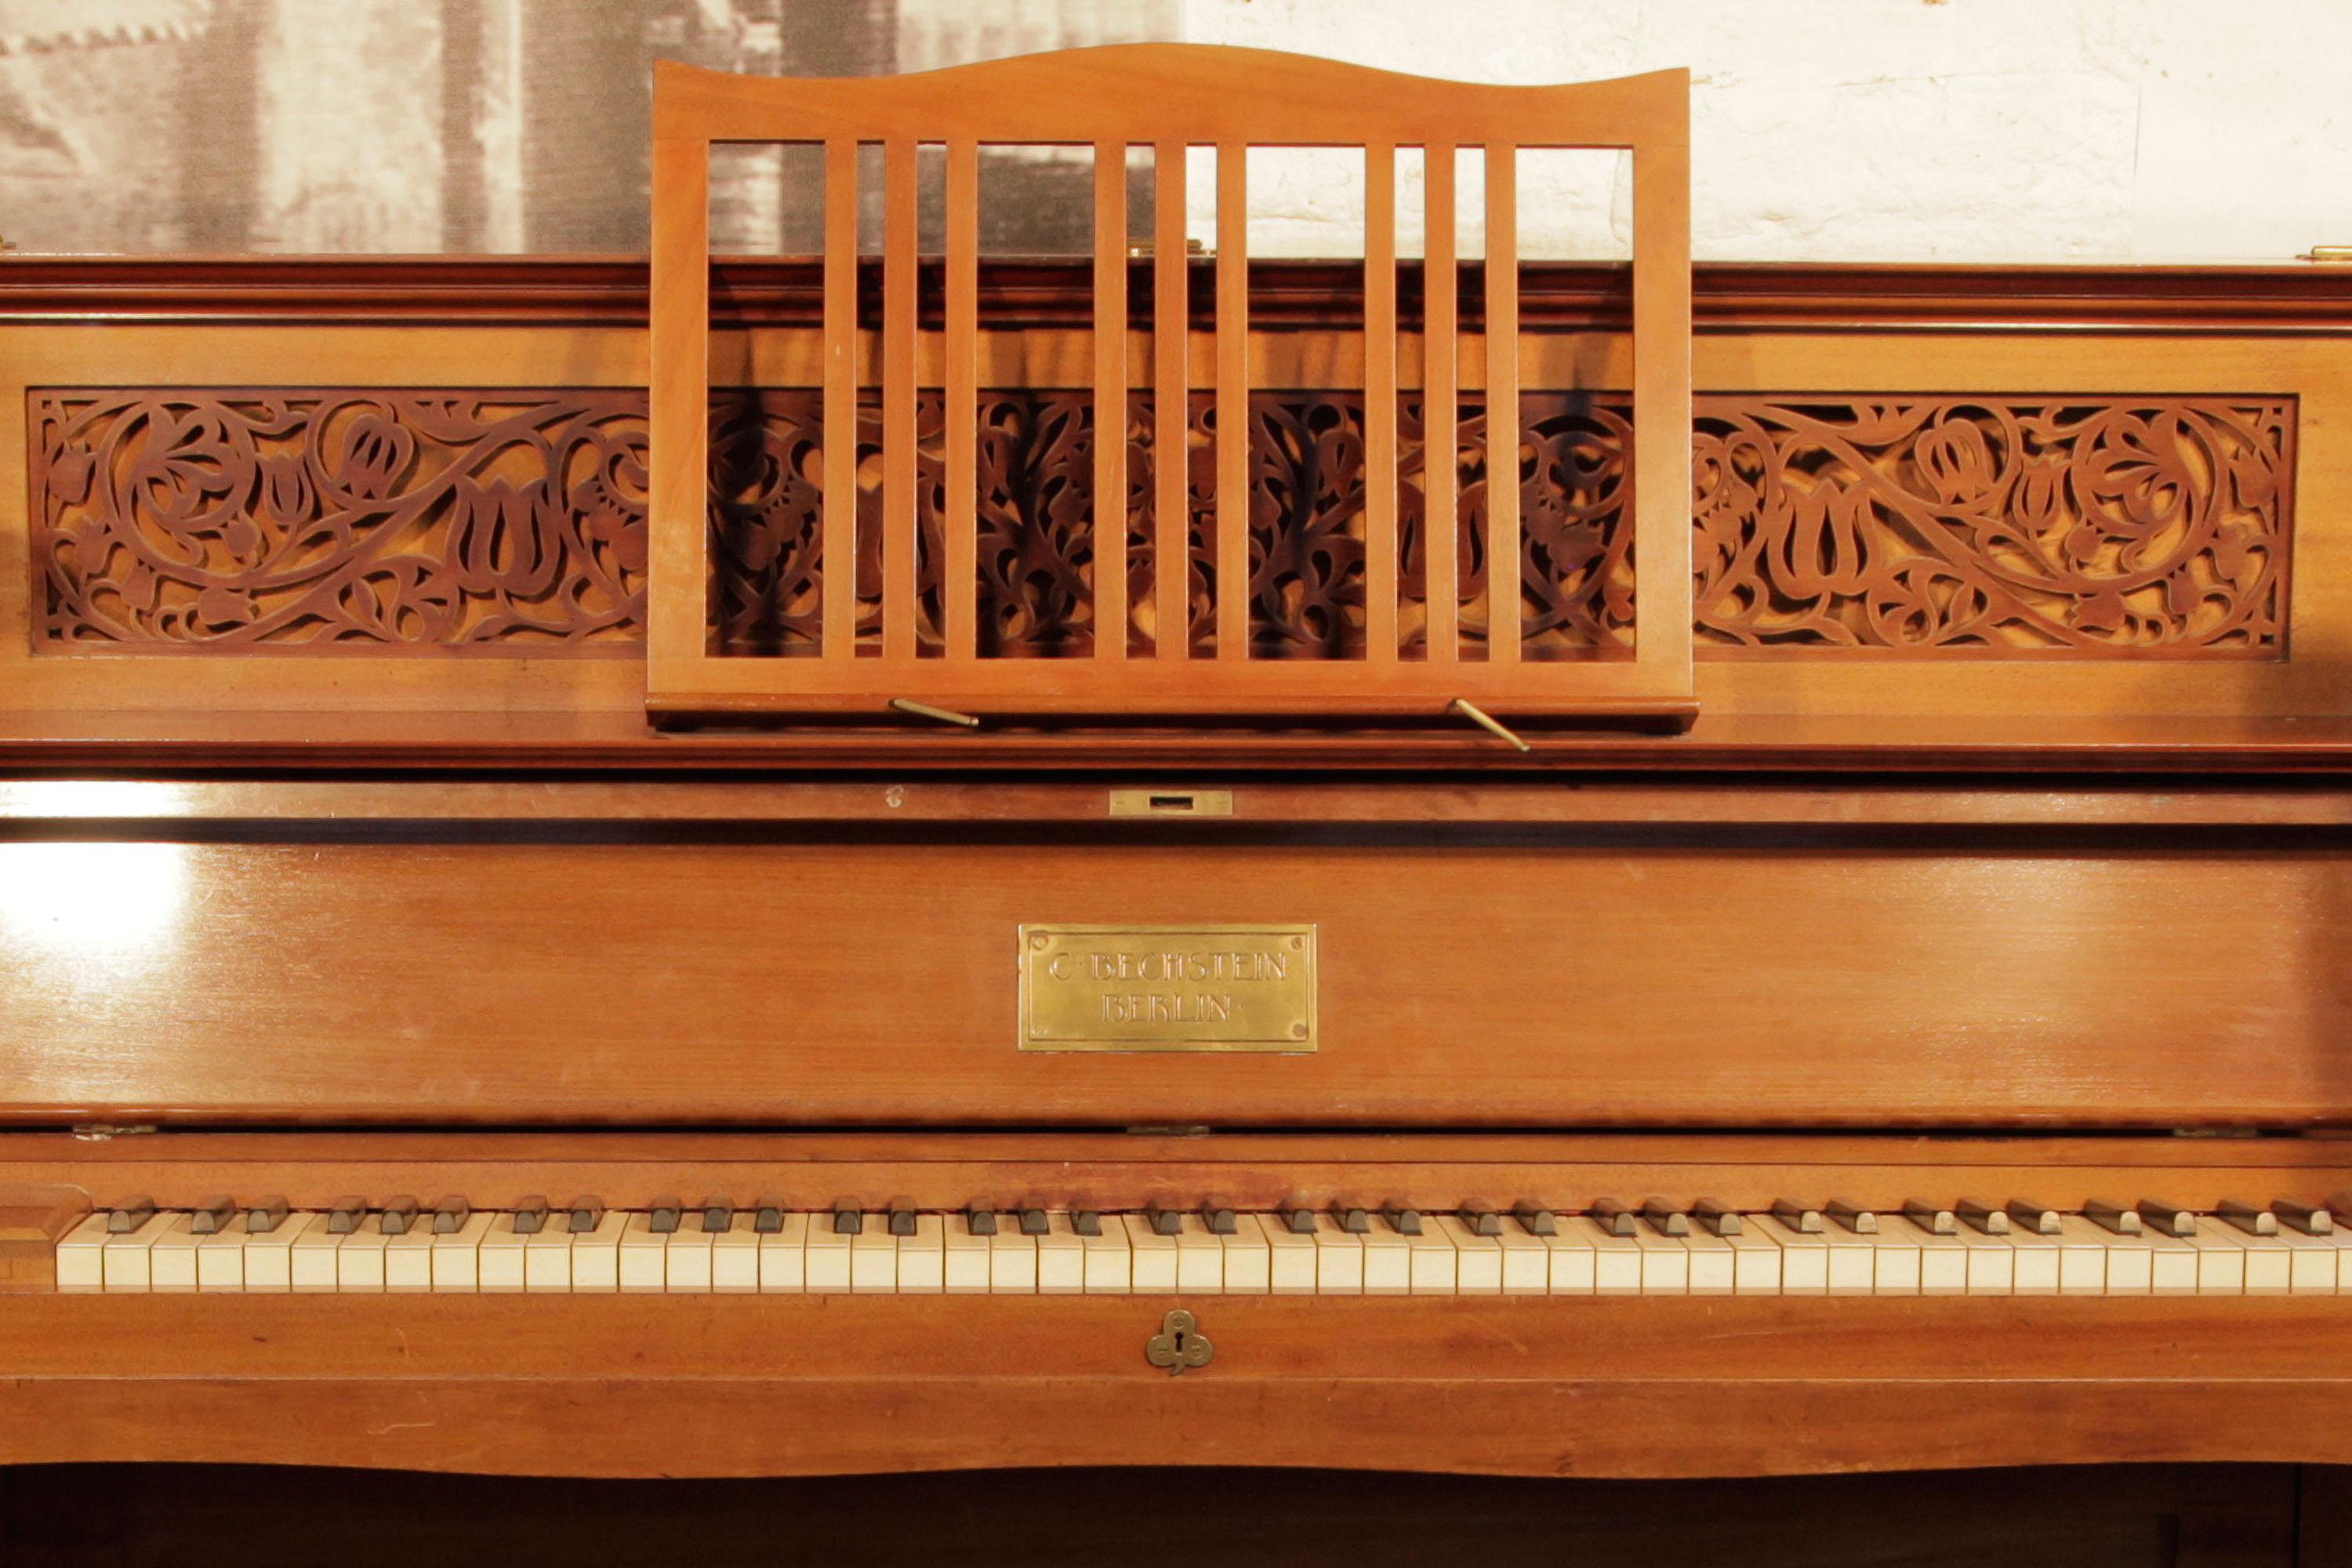 Arts and Crafts style, 1898, Bechstein upright piano with a walnut case. Cabinet features a cut-out, fretwork panel in a stylised floral design. Cabinet features sizeable, brass hinges on the fall and top lid with trefoil embellishments. Part of the